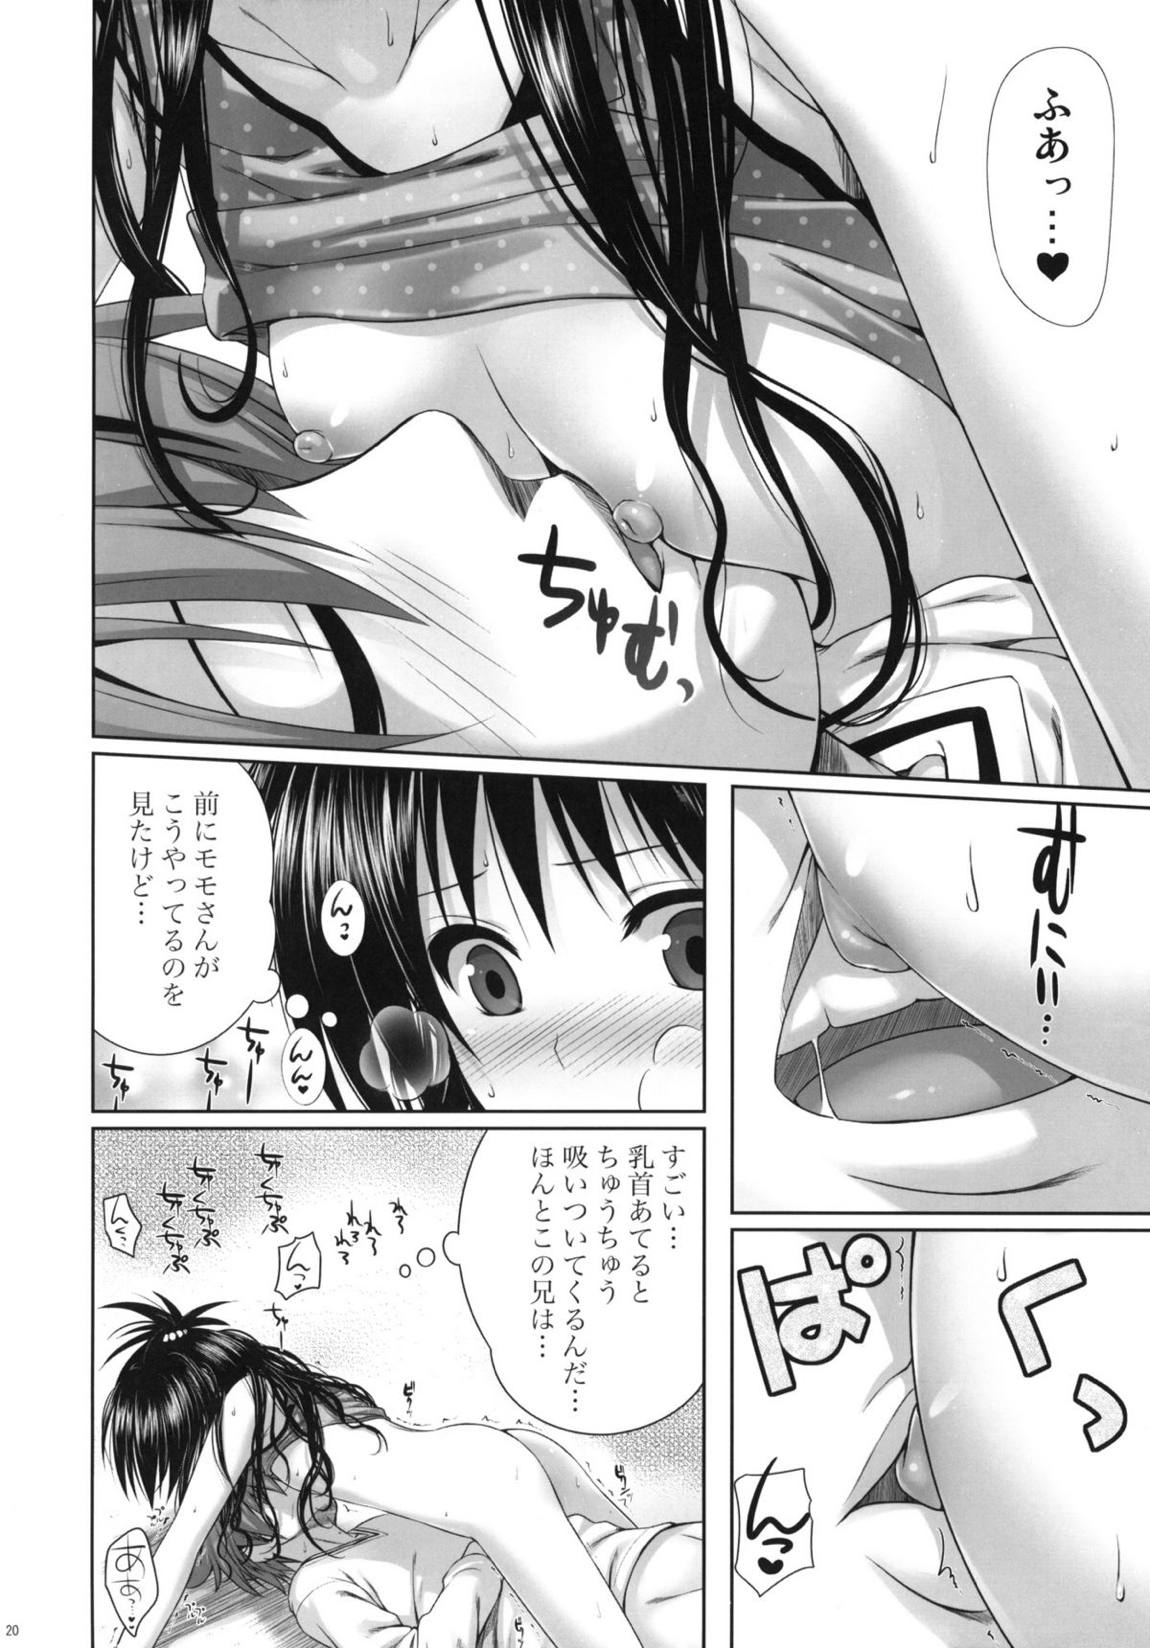 Mikan’s delusion, and usual days 20ページ